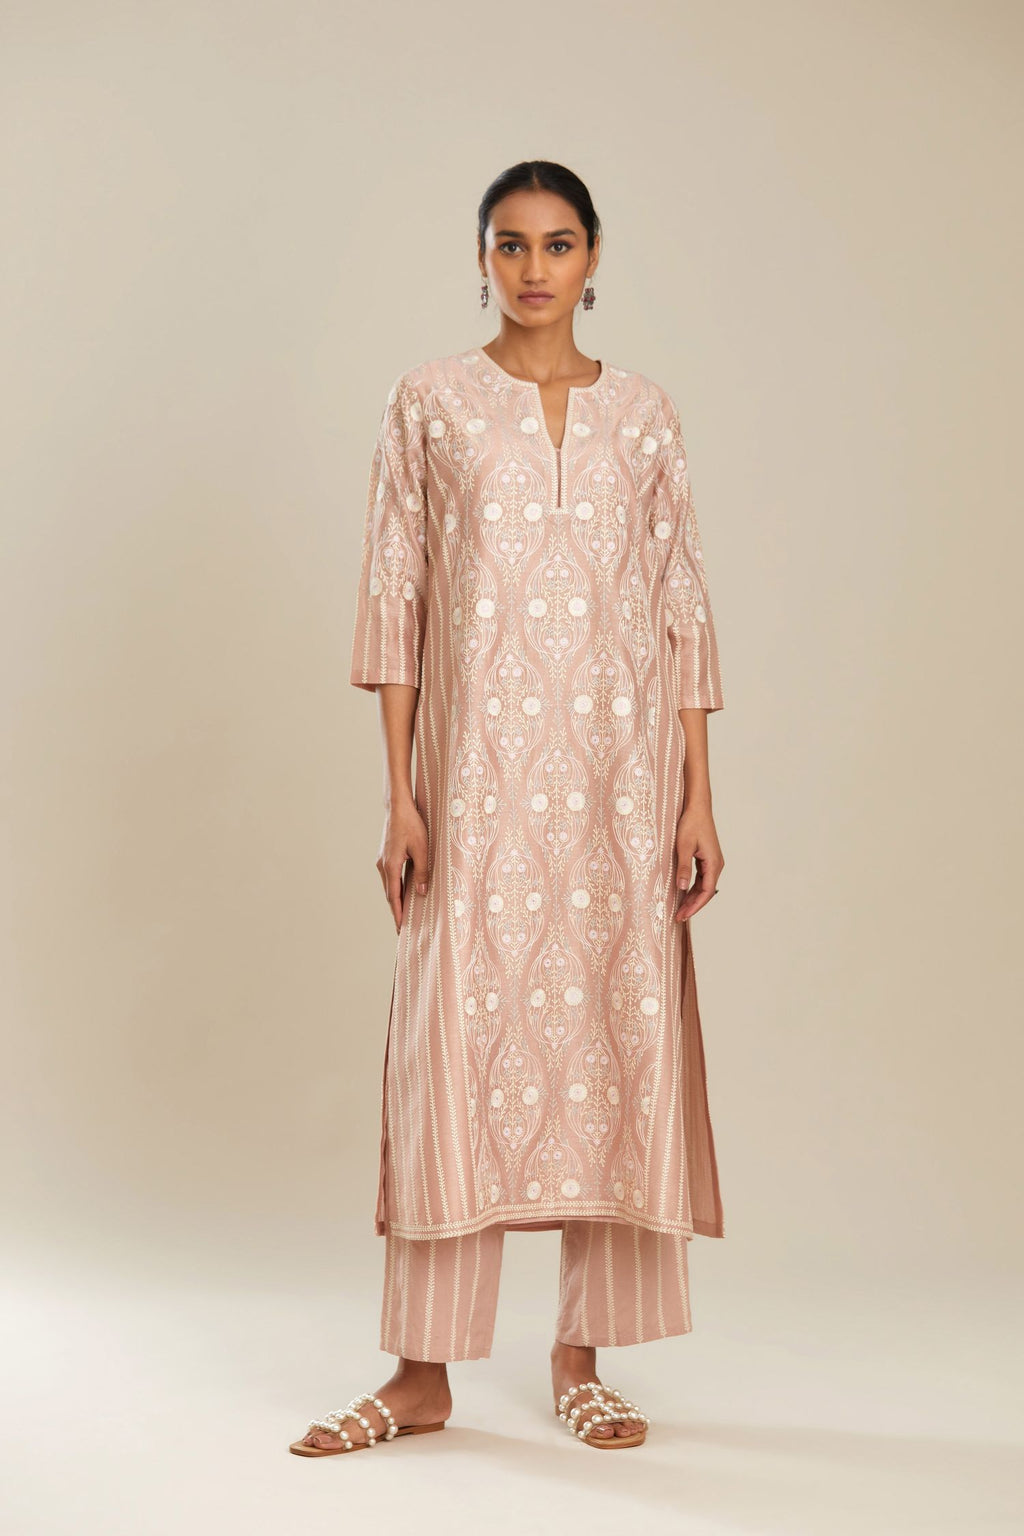 Silk chanderi straight kurta set with jaal embroidery in central panel and striped embroidery at sides